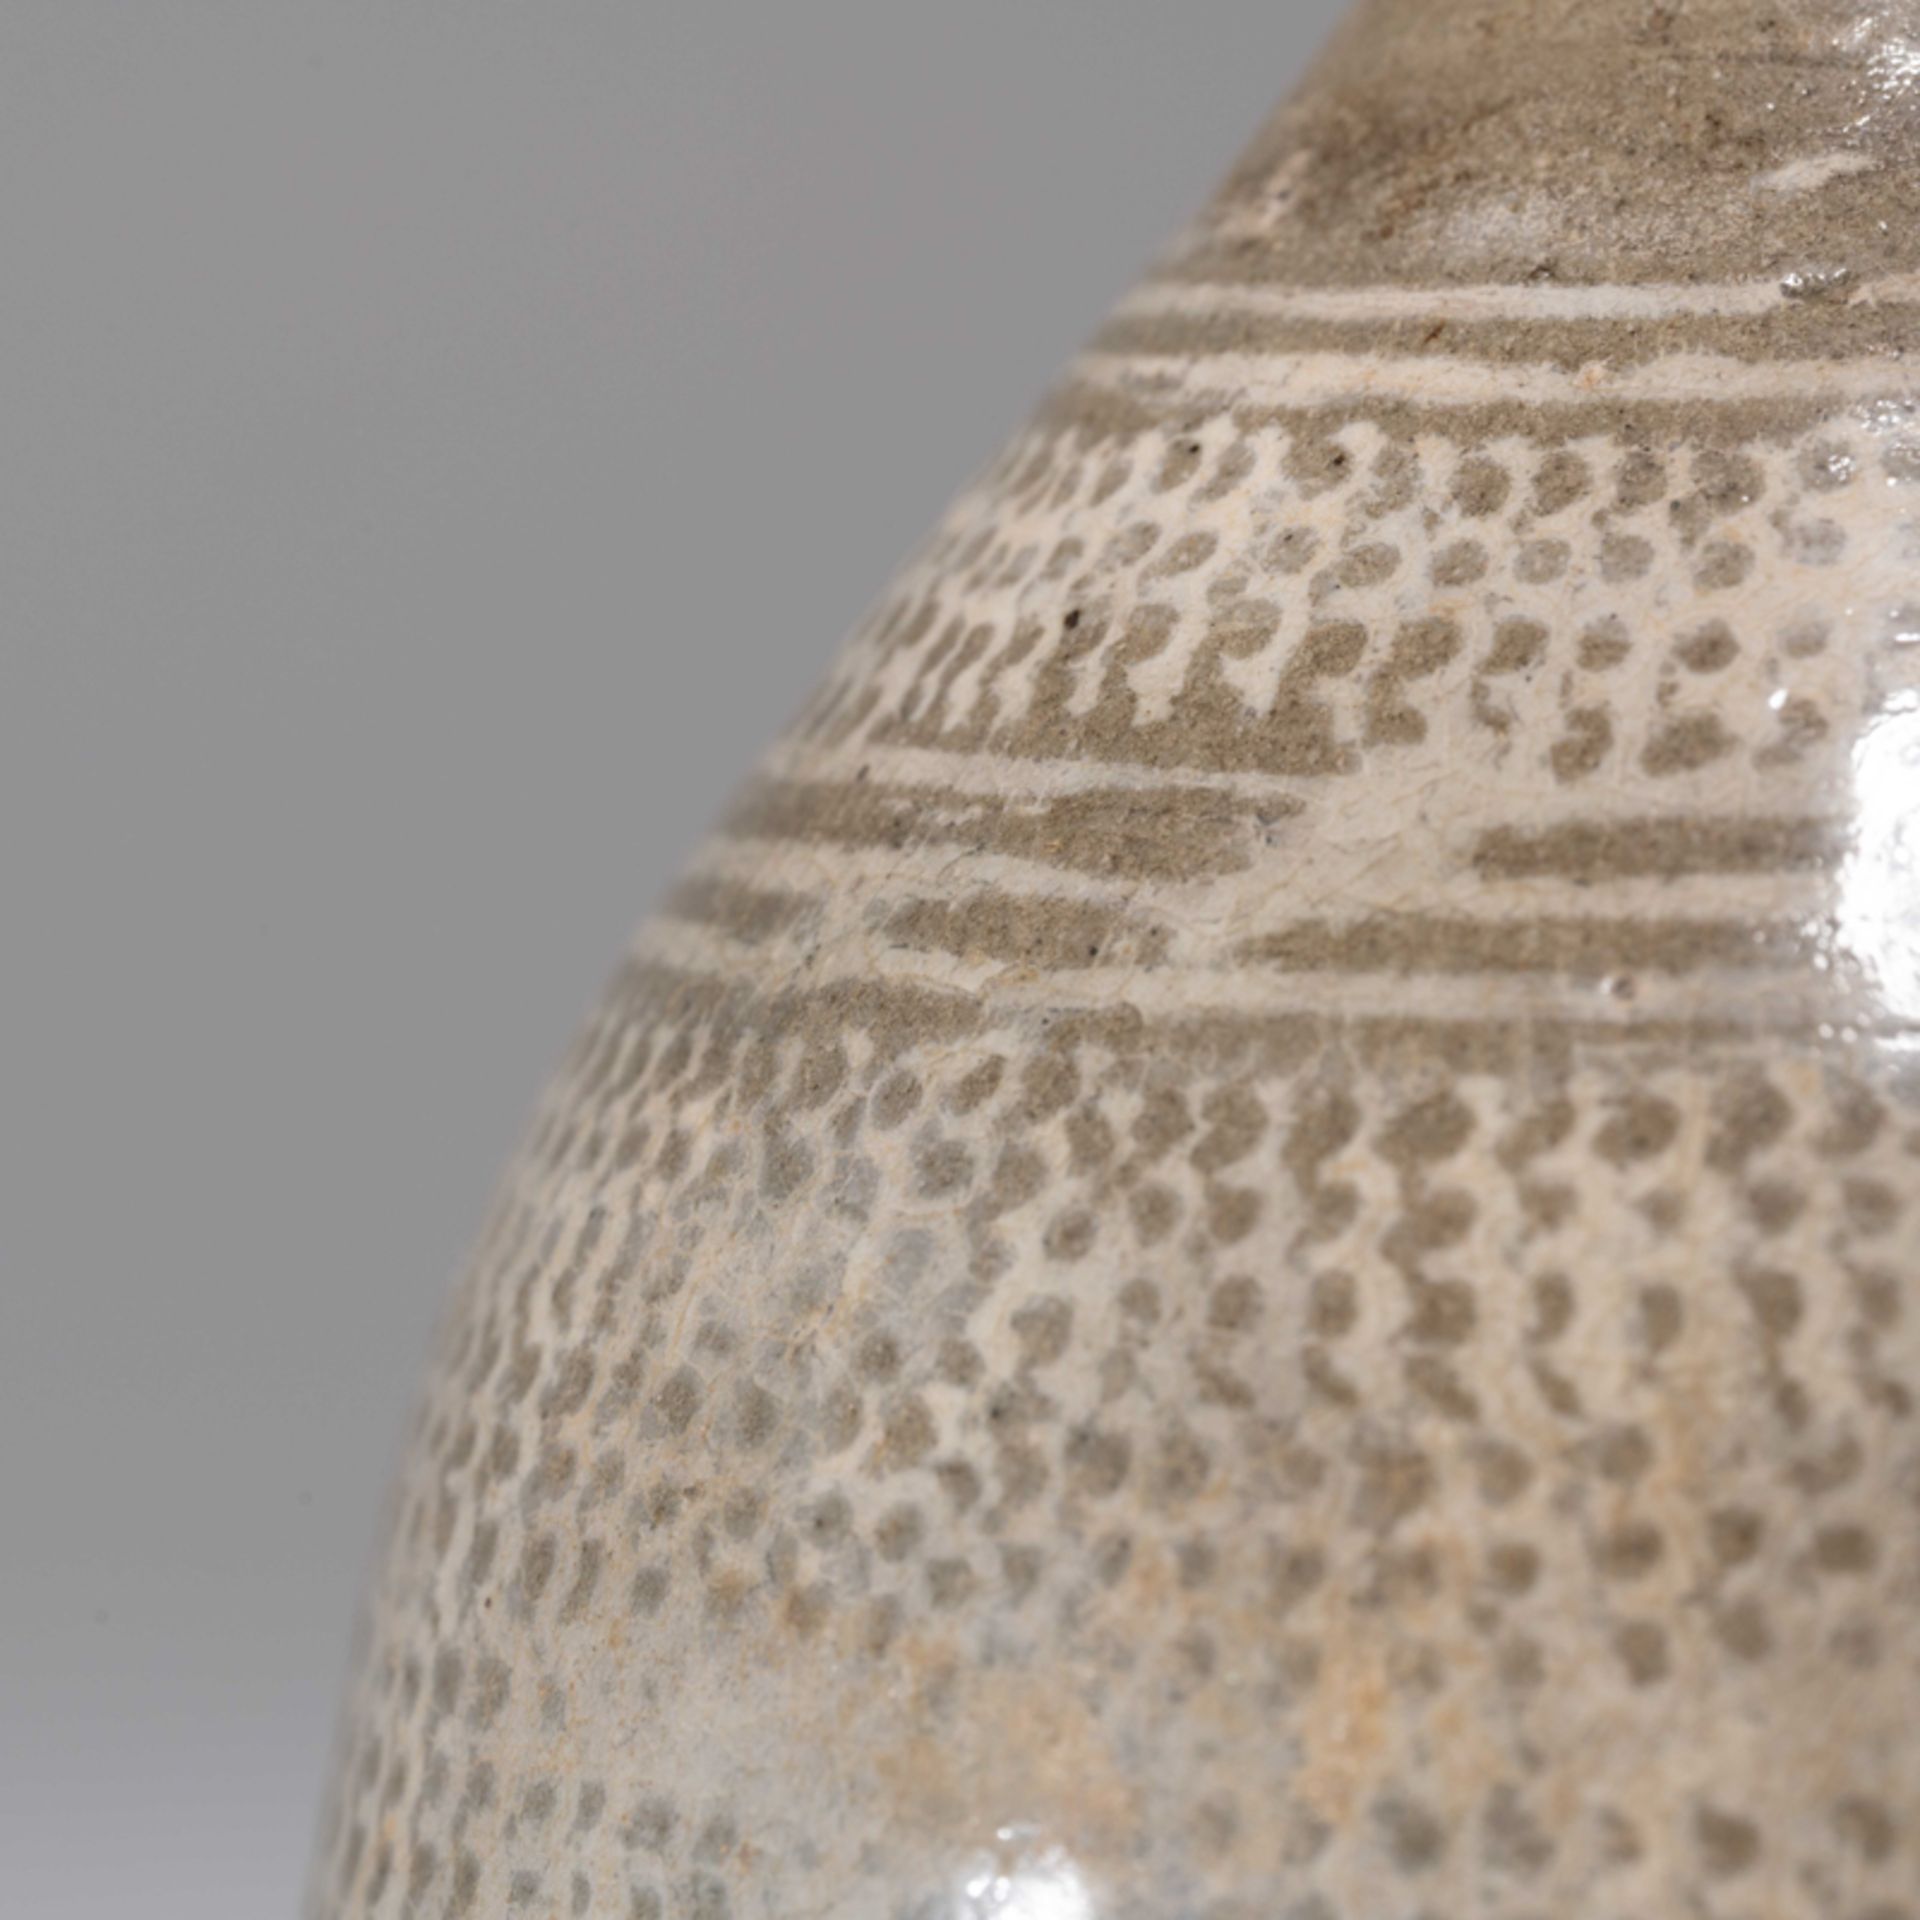 A KOREAN WHITE SLIP INLAID BUNCHEONG PEAR-SHAPED VASE, JOSEON DYNASTY - Image 5 of 8